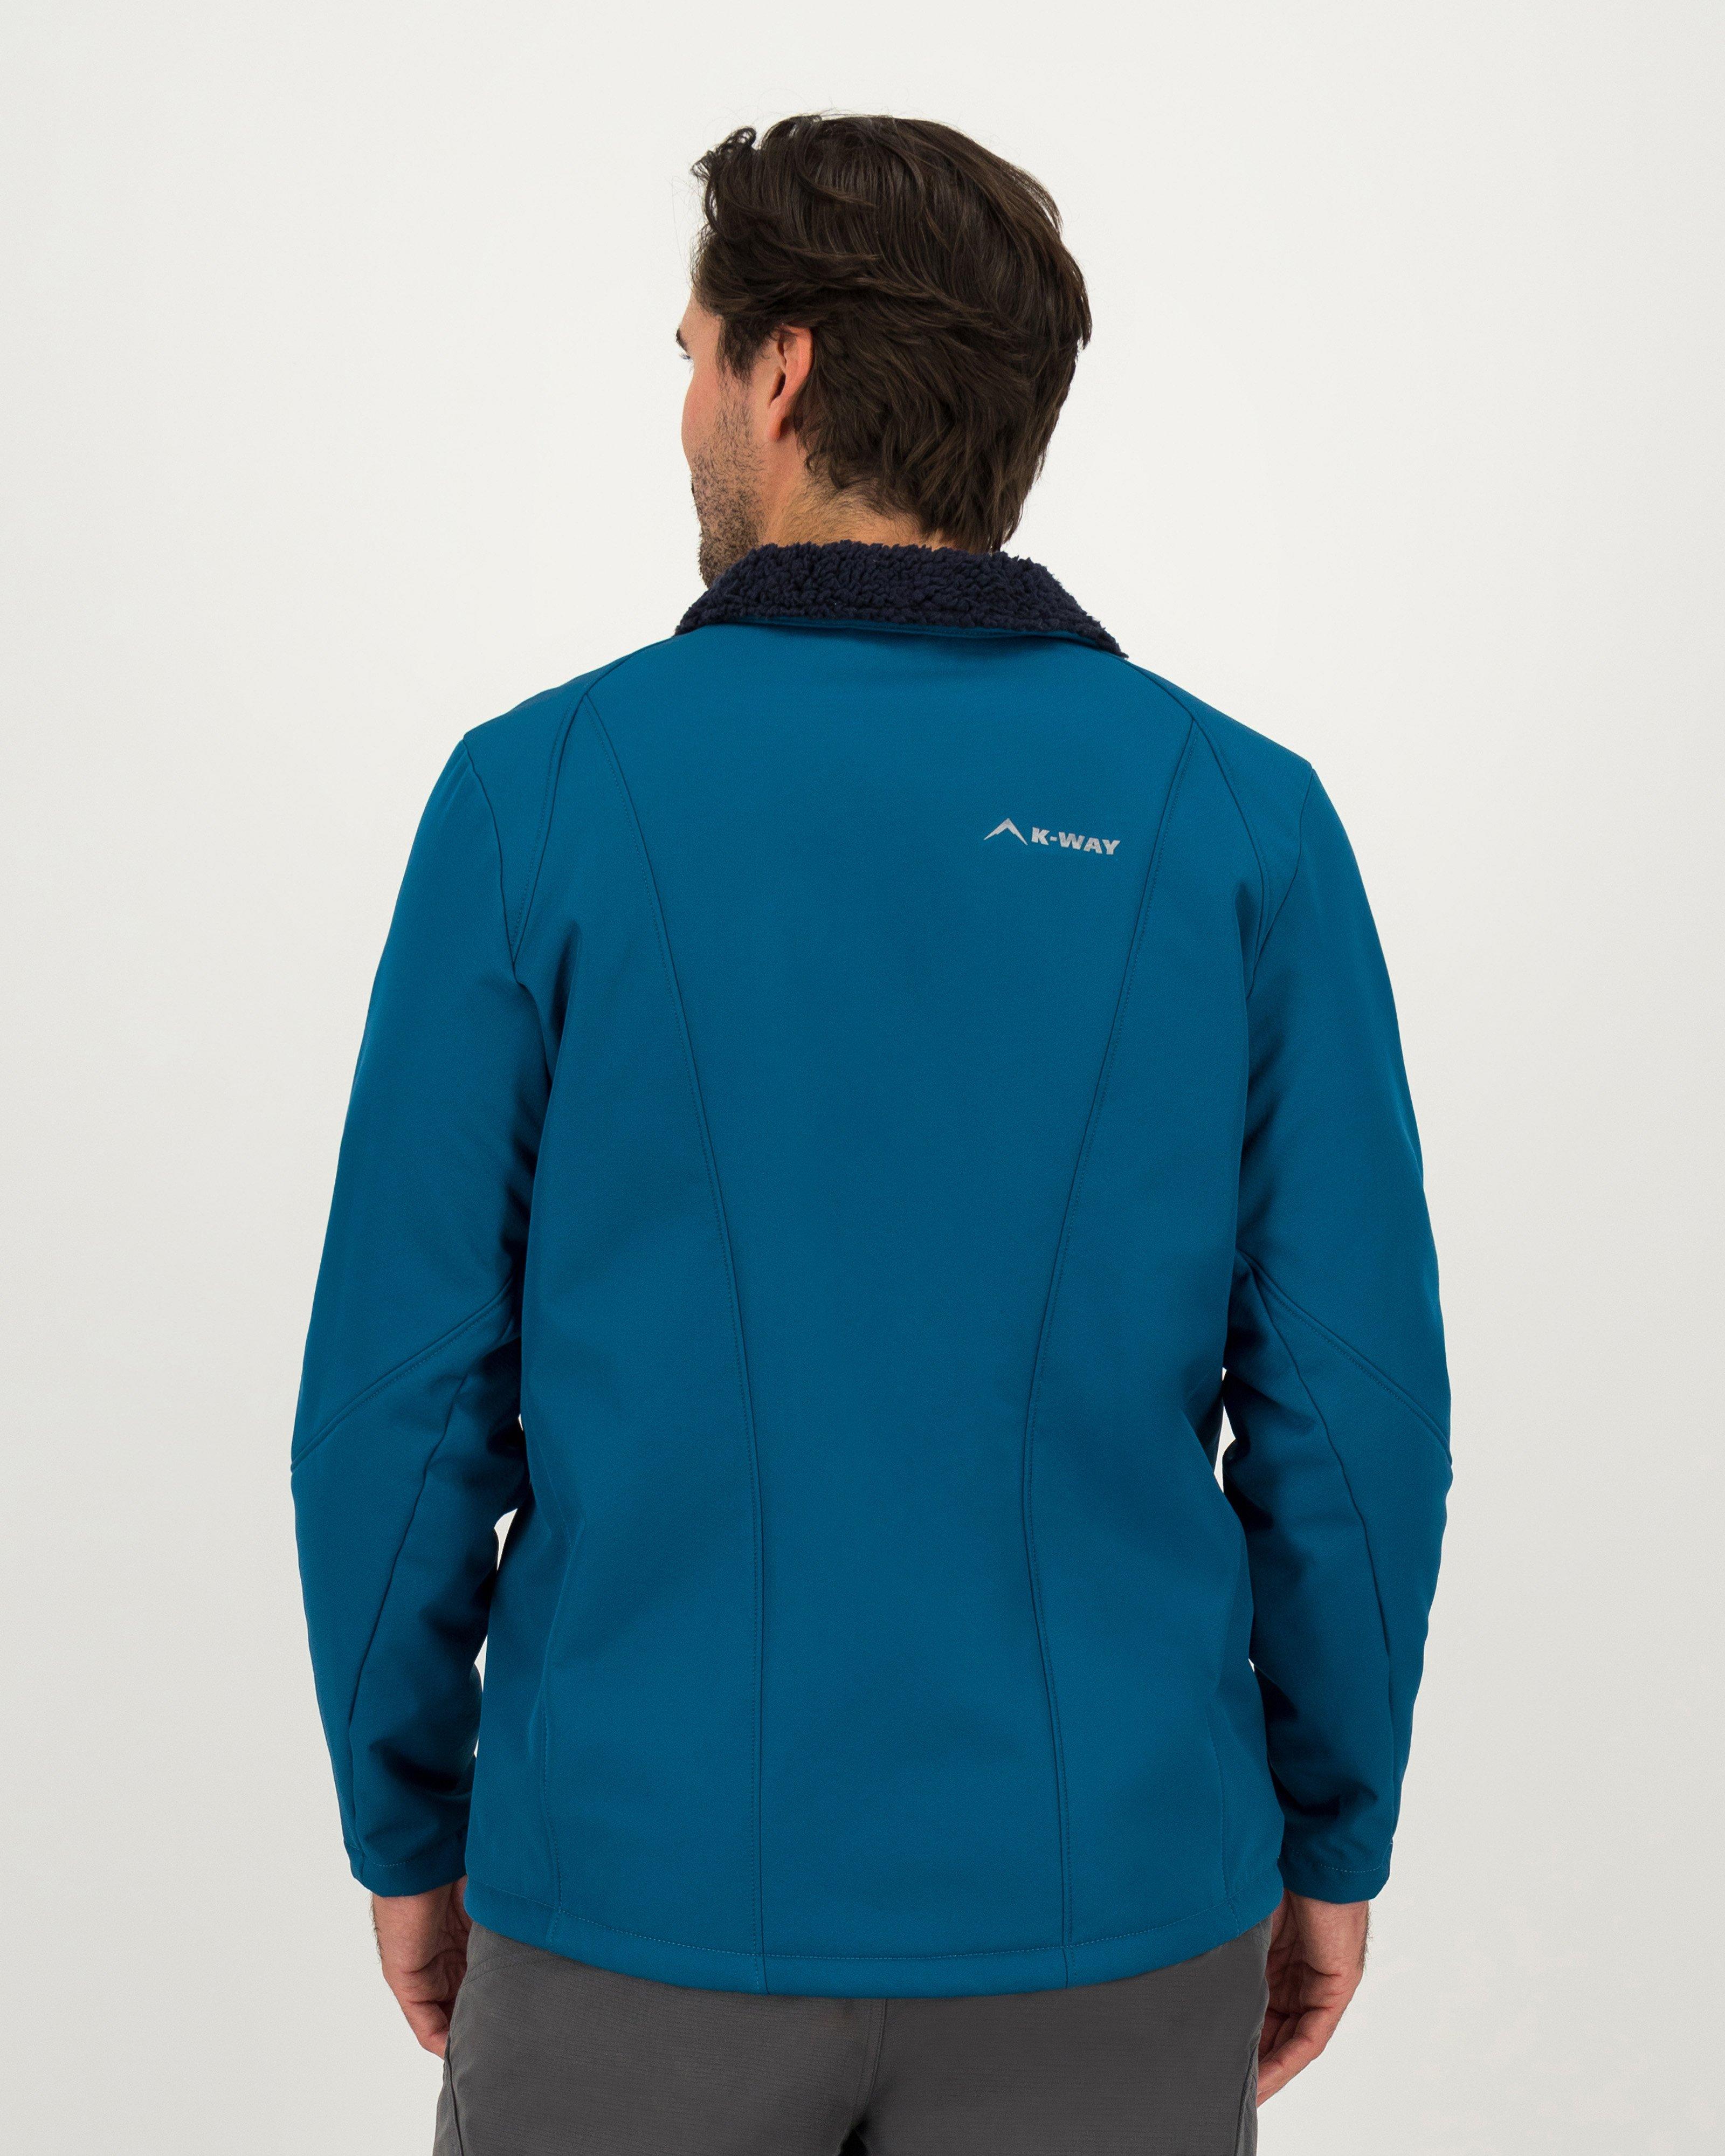 Combination softshell jacket with two side pockets and 2 chest